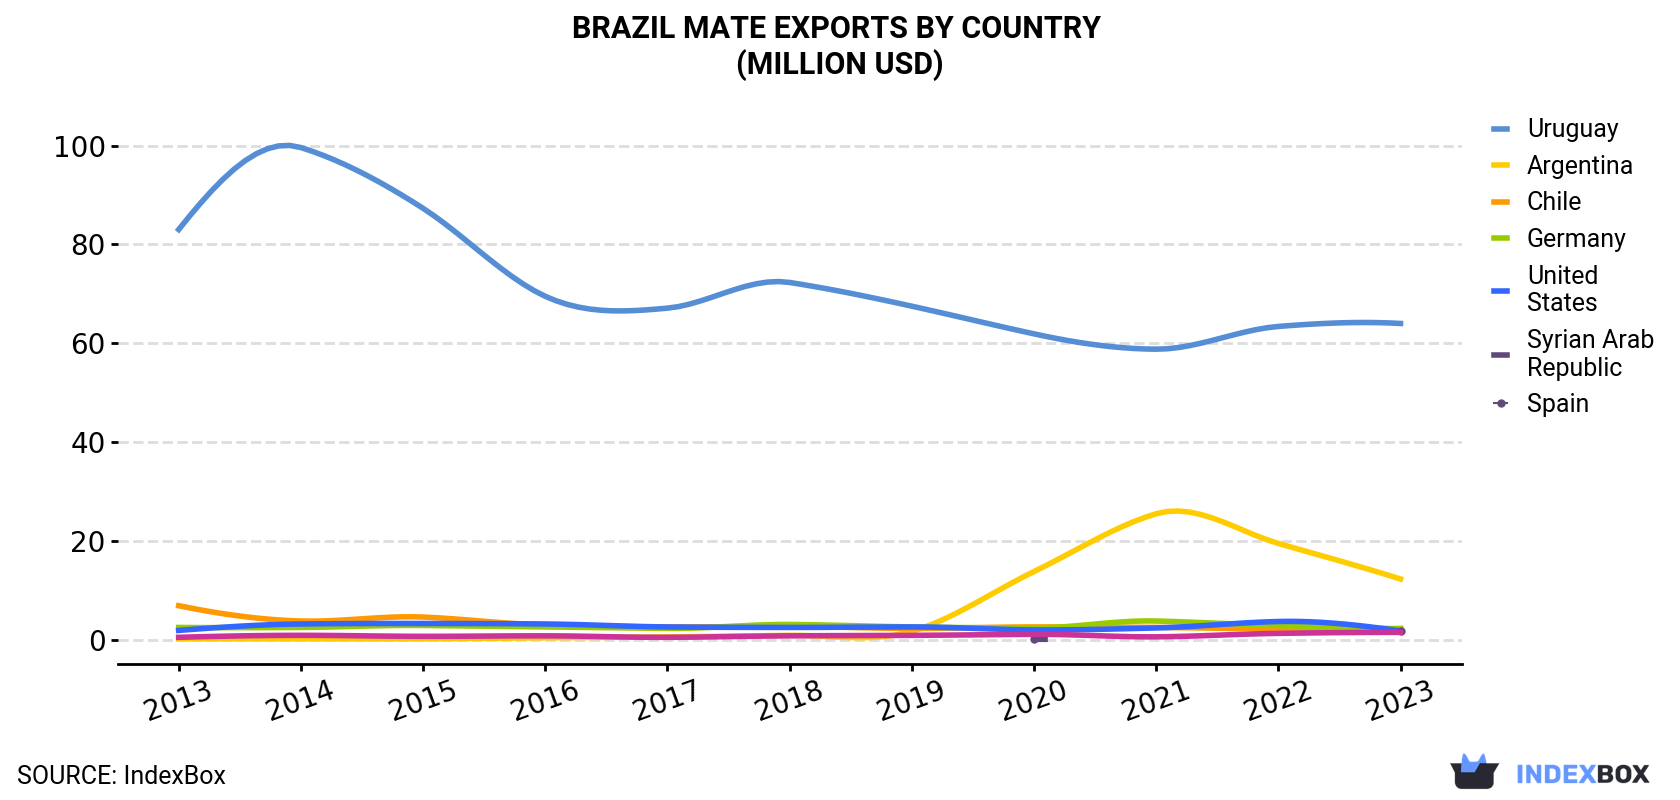 Brazil Mate Exports By Country (Million USD)